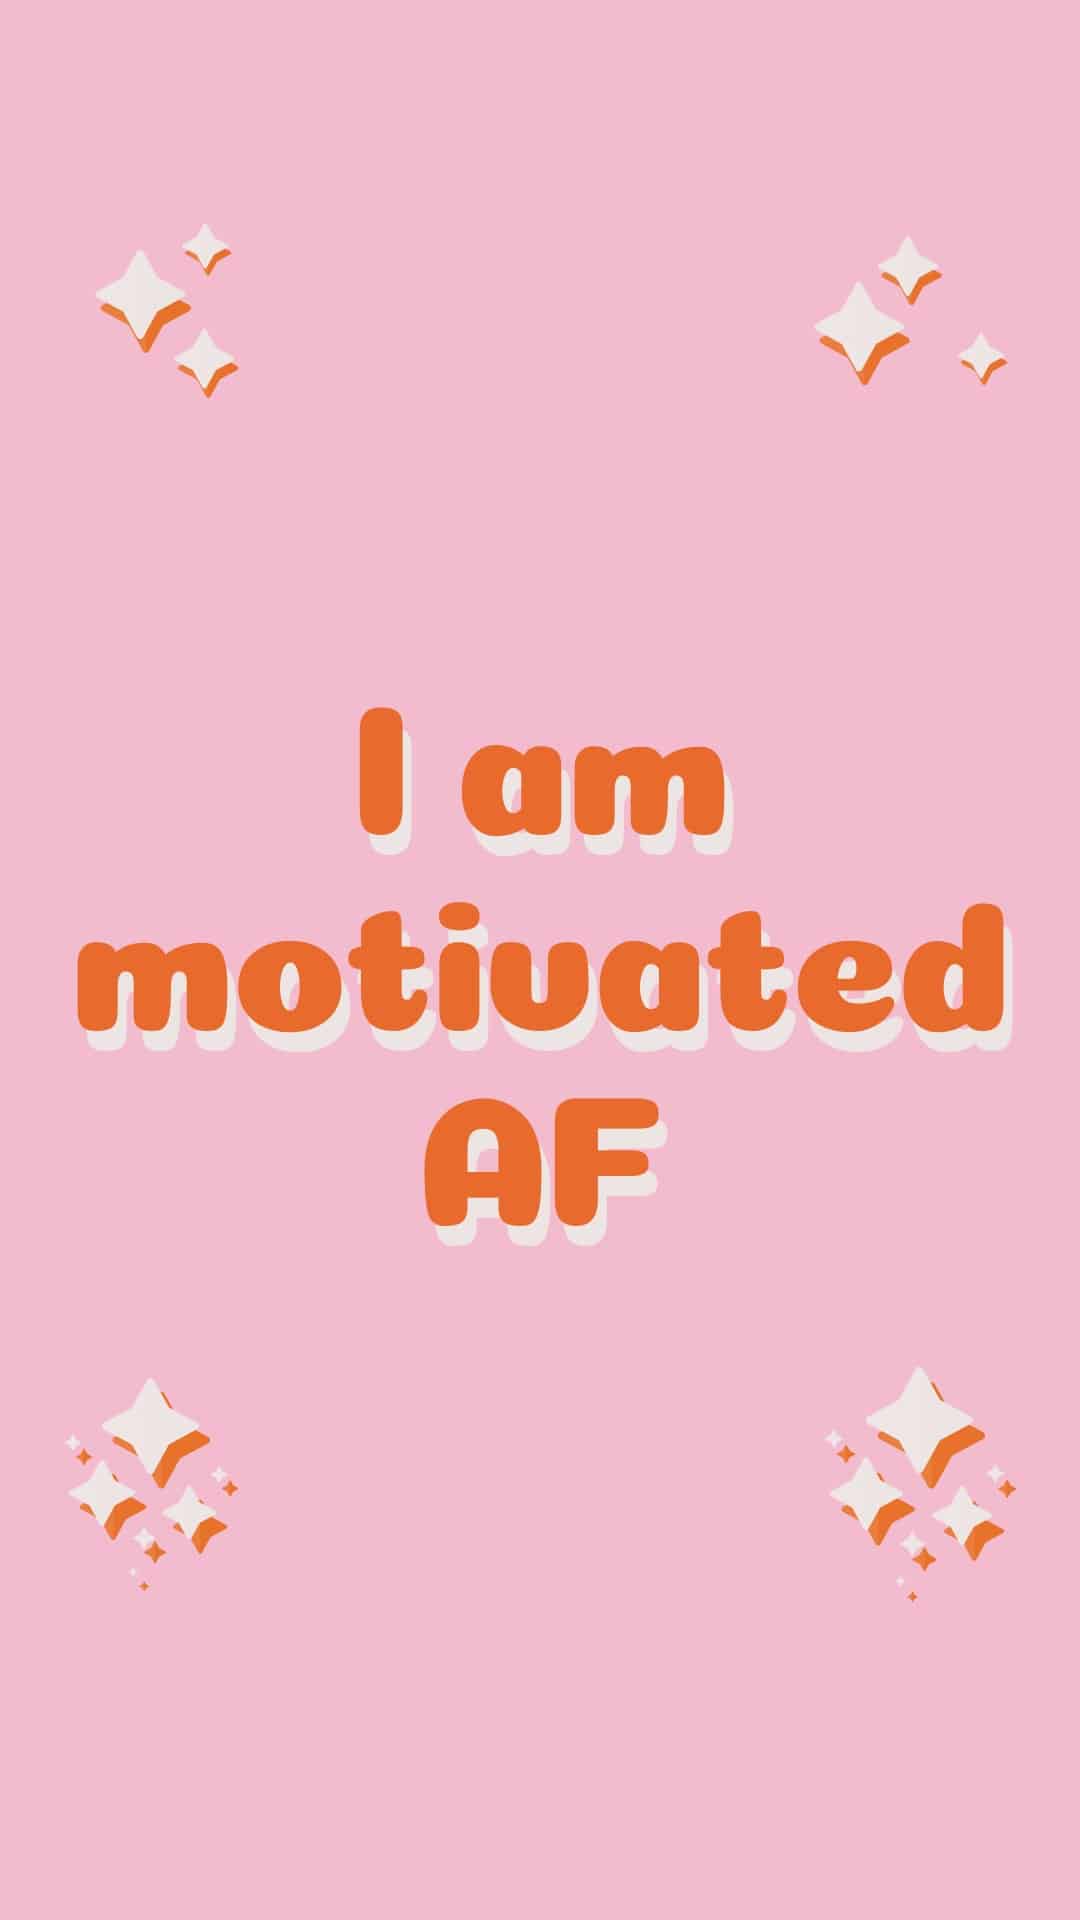 Positive Phone Wallpaper Affirmations For A Better You in 2020